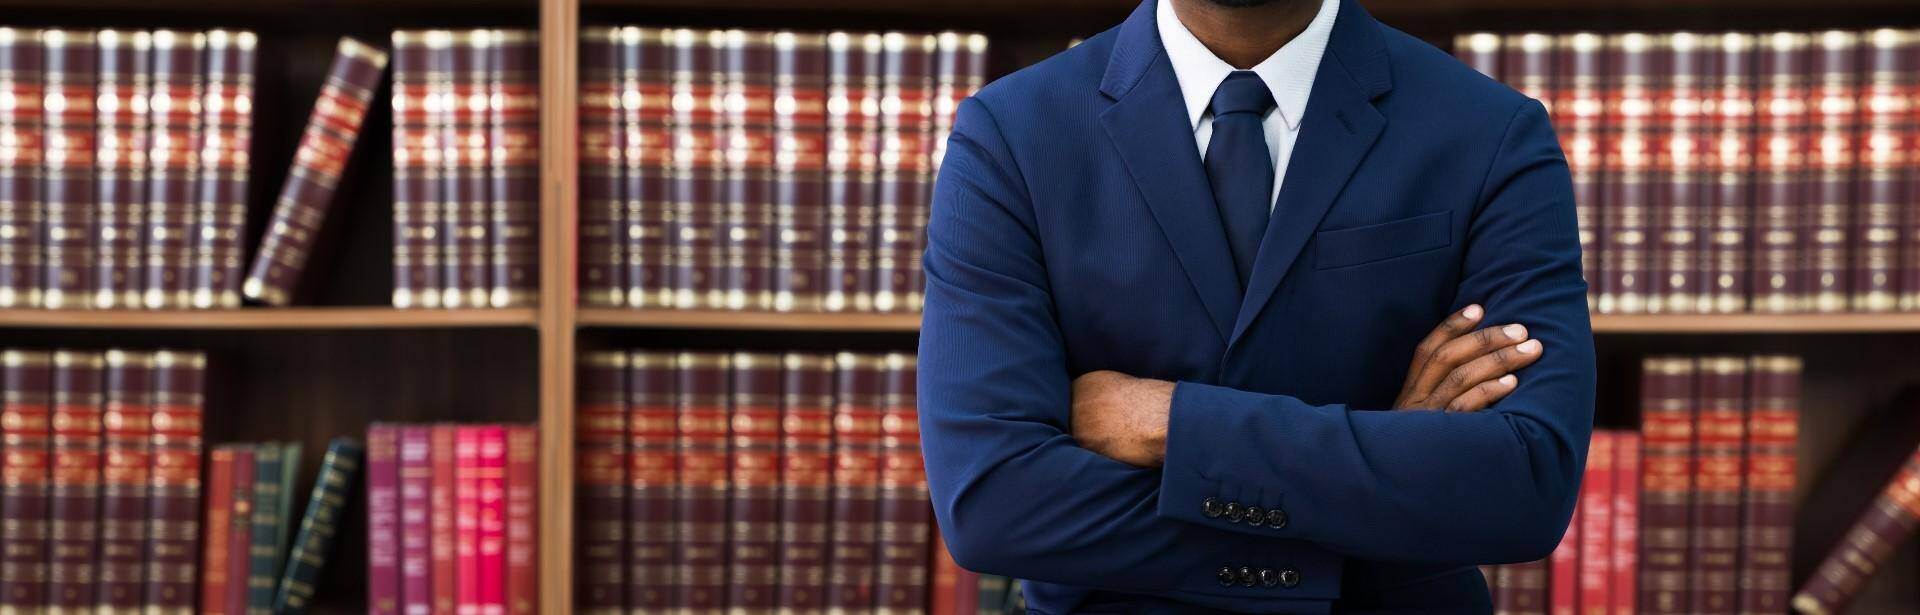 A black lawyer standing in front of a bookshelf of law book in Newnan, Georgia